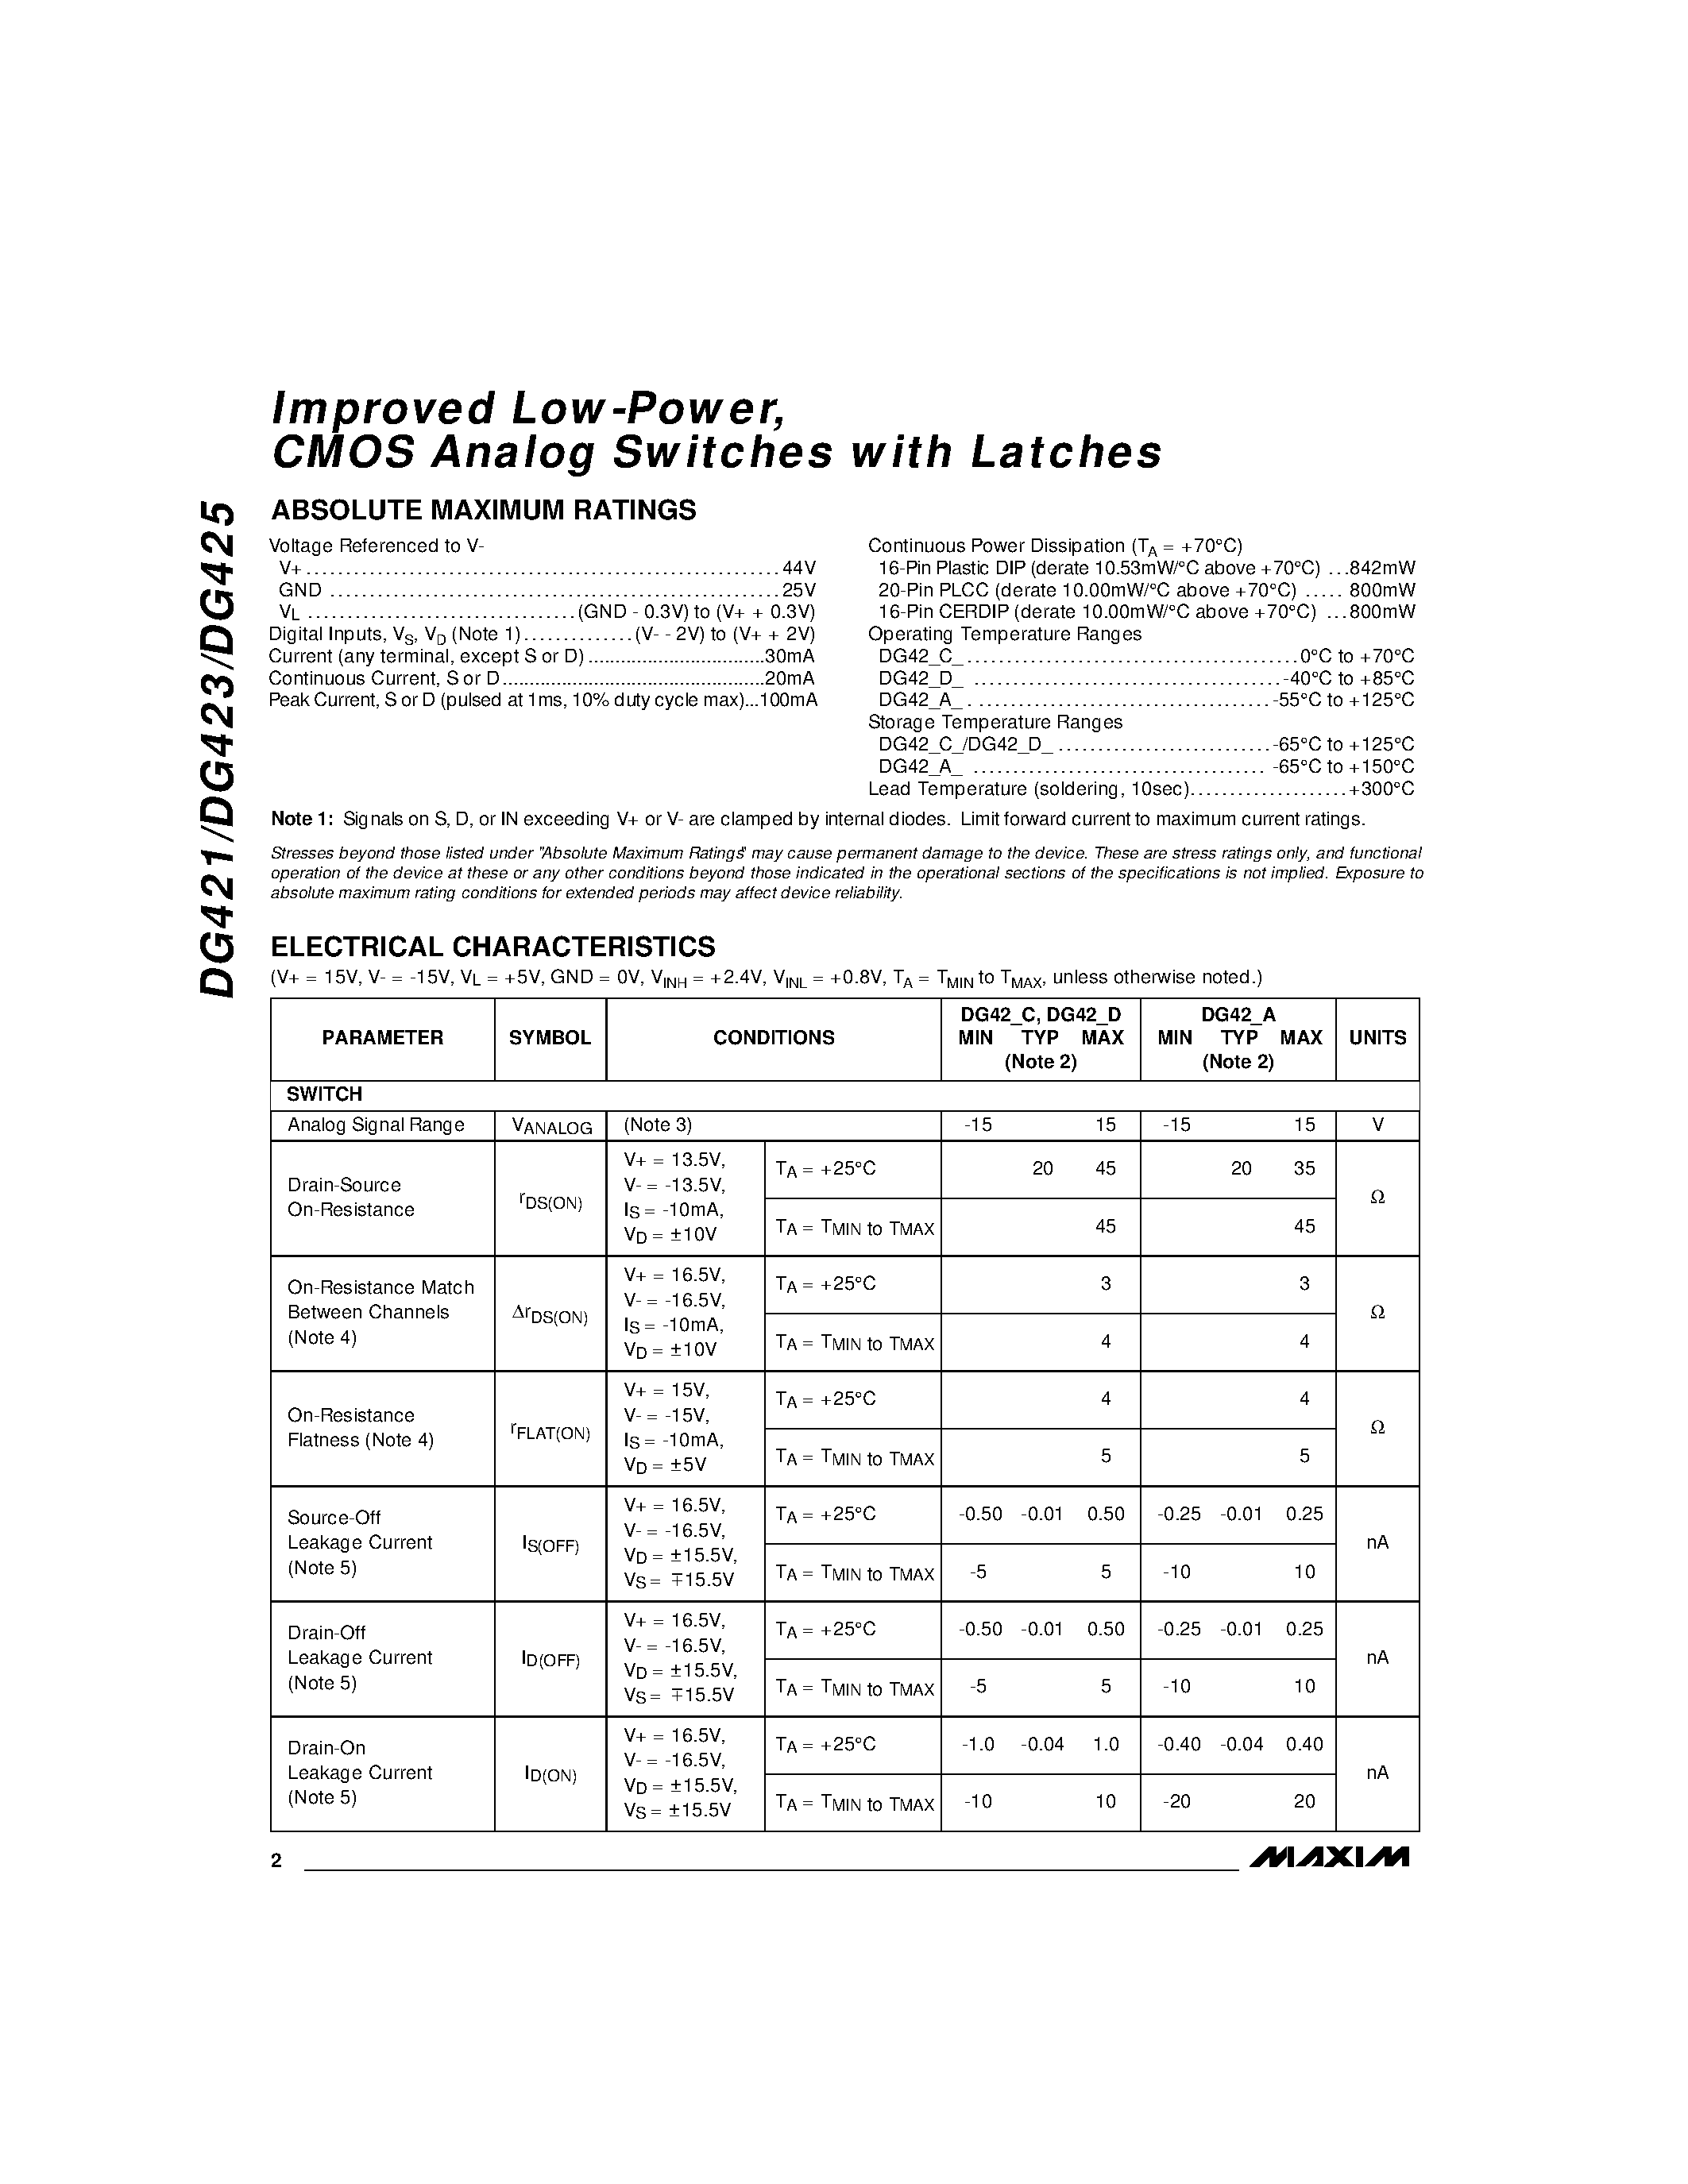 Datasheet DG421C/D - Improved Low-Power / CMOS Analog Switches with Latches page 2